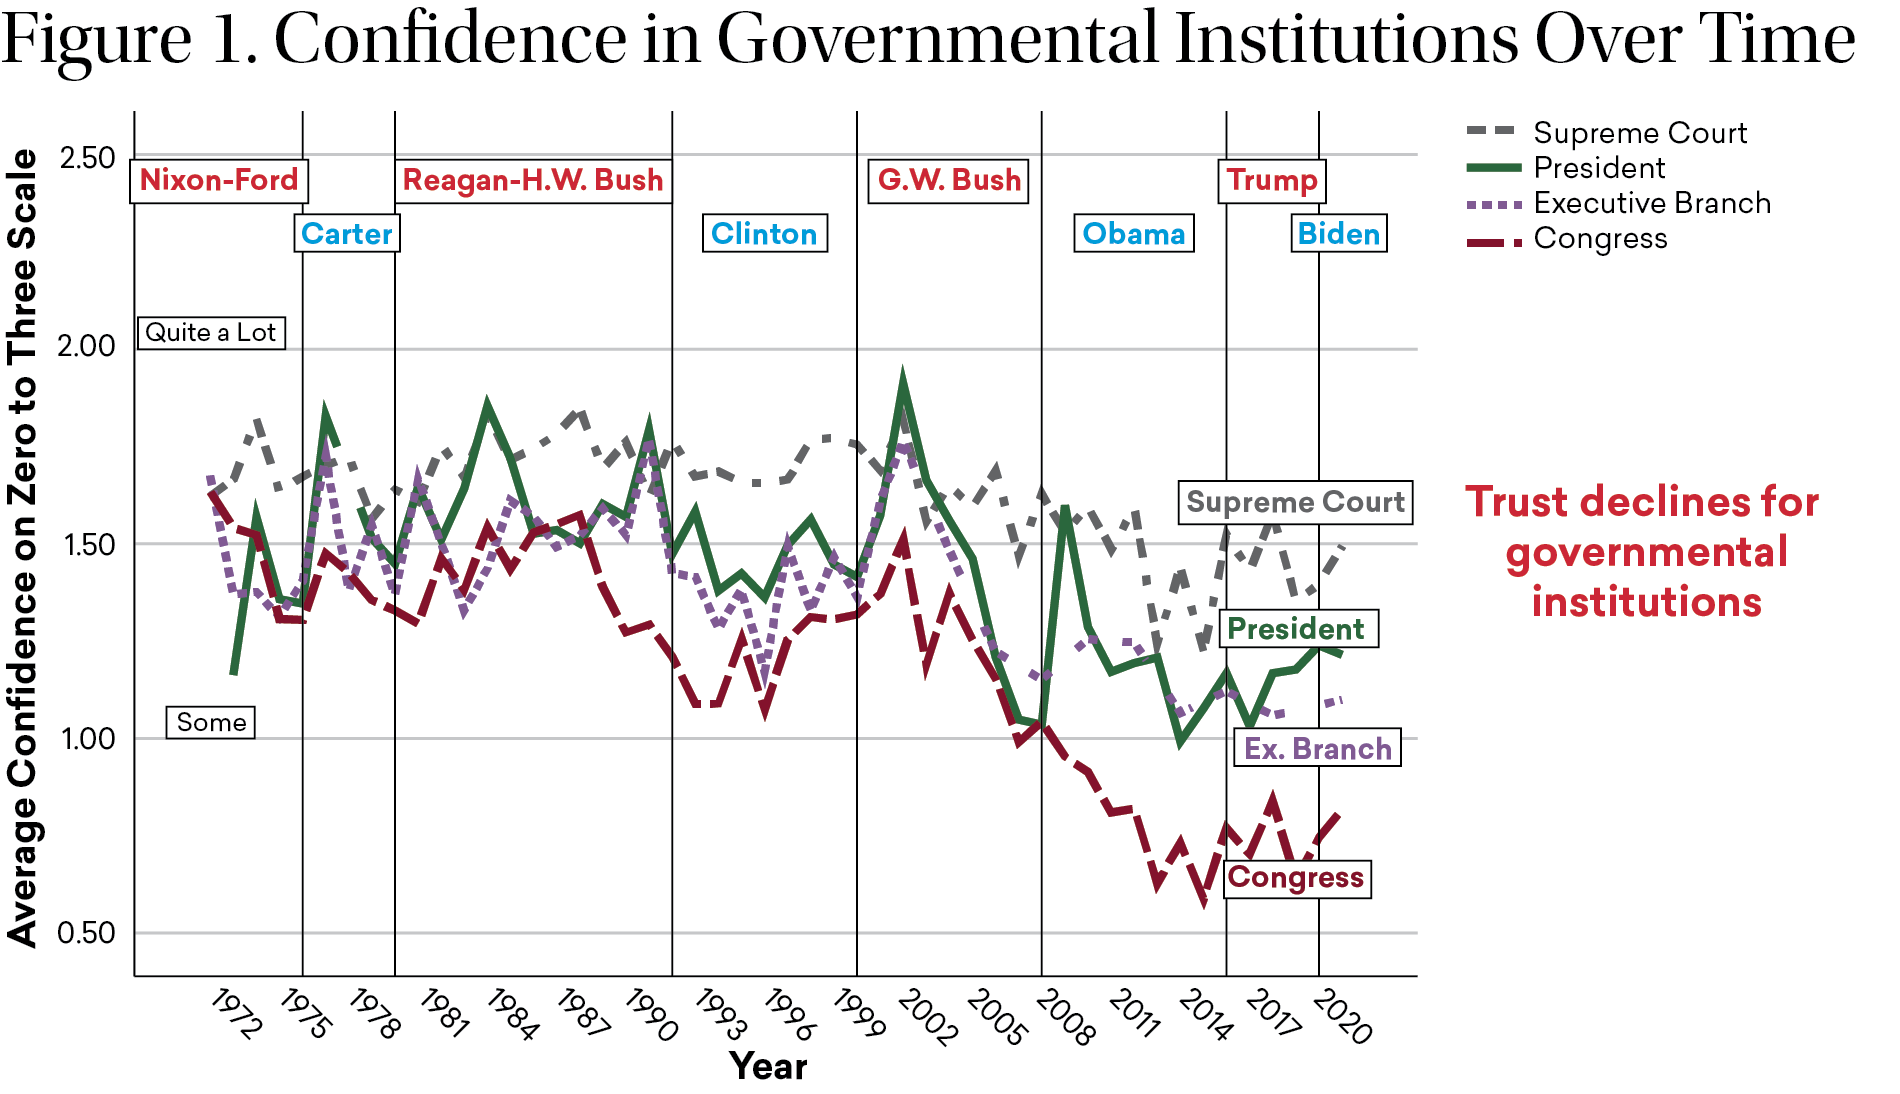 Figure 1: A line chart shows declining confidence in four political institutions: the Supreme Court, president, executive branch, and Congress. 